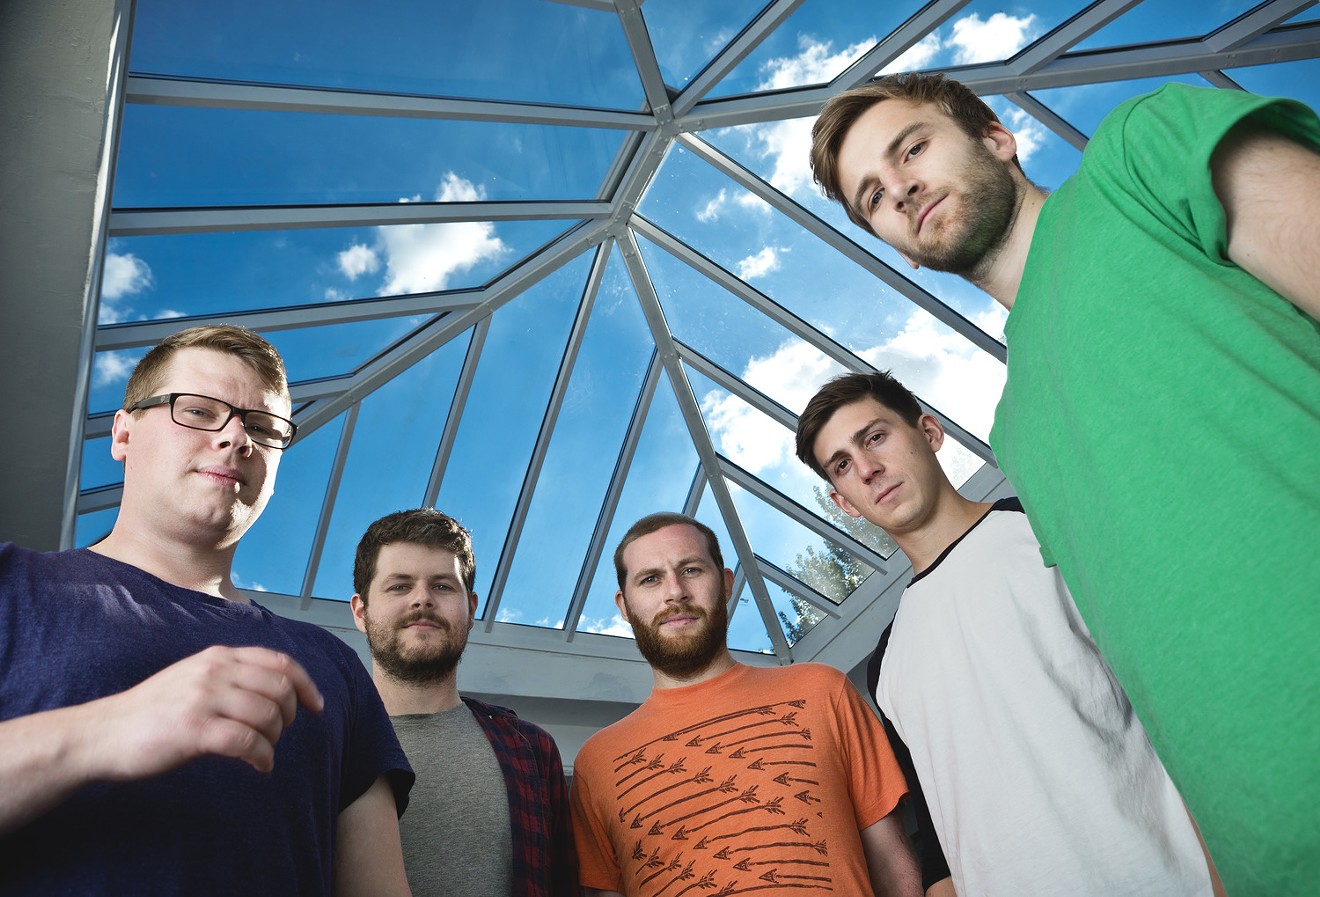 We Were Promised Jetpacks are scheduled to perform on Tuesday, July 23, at Crescent Ballroom.